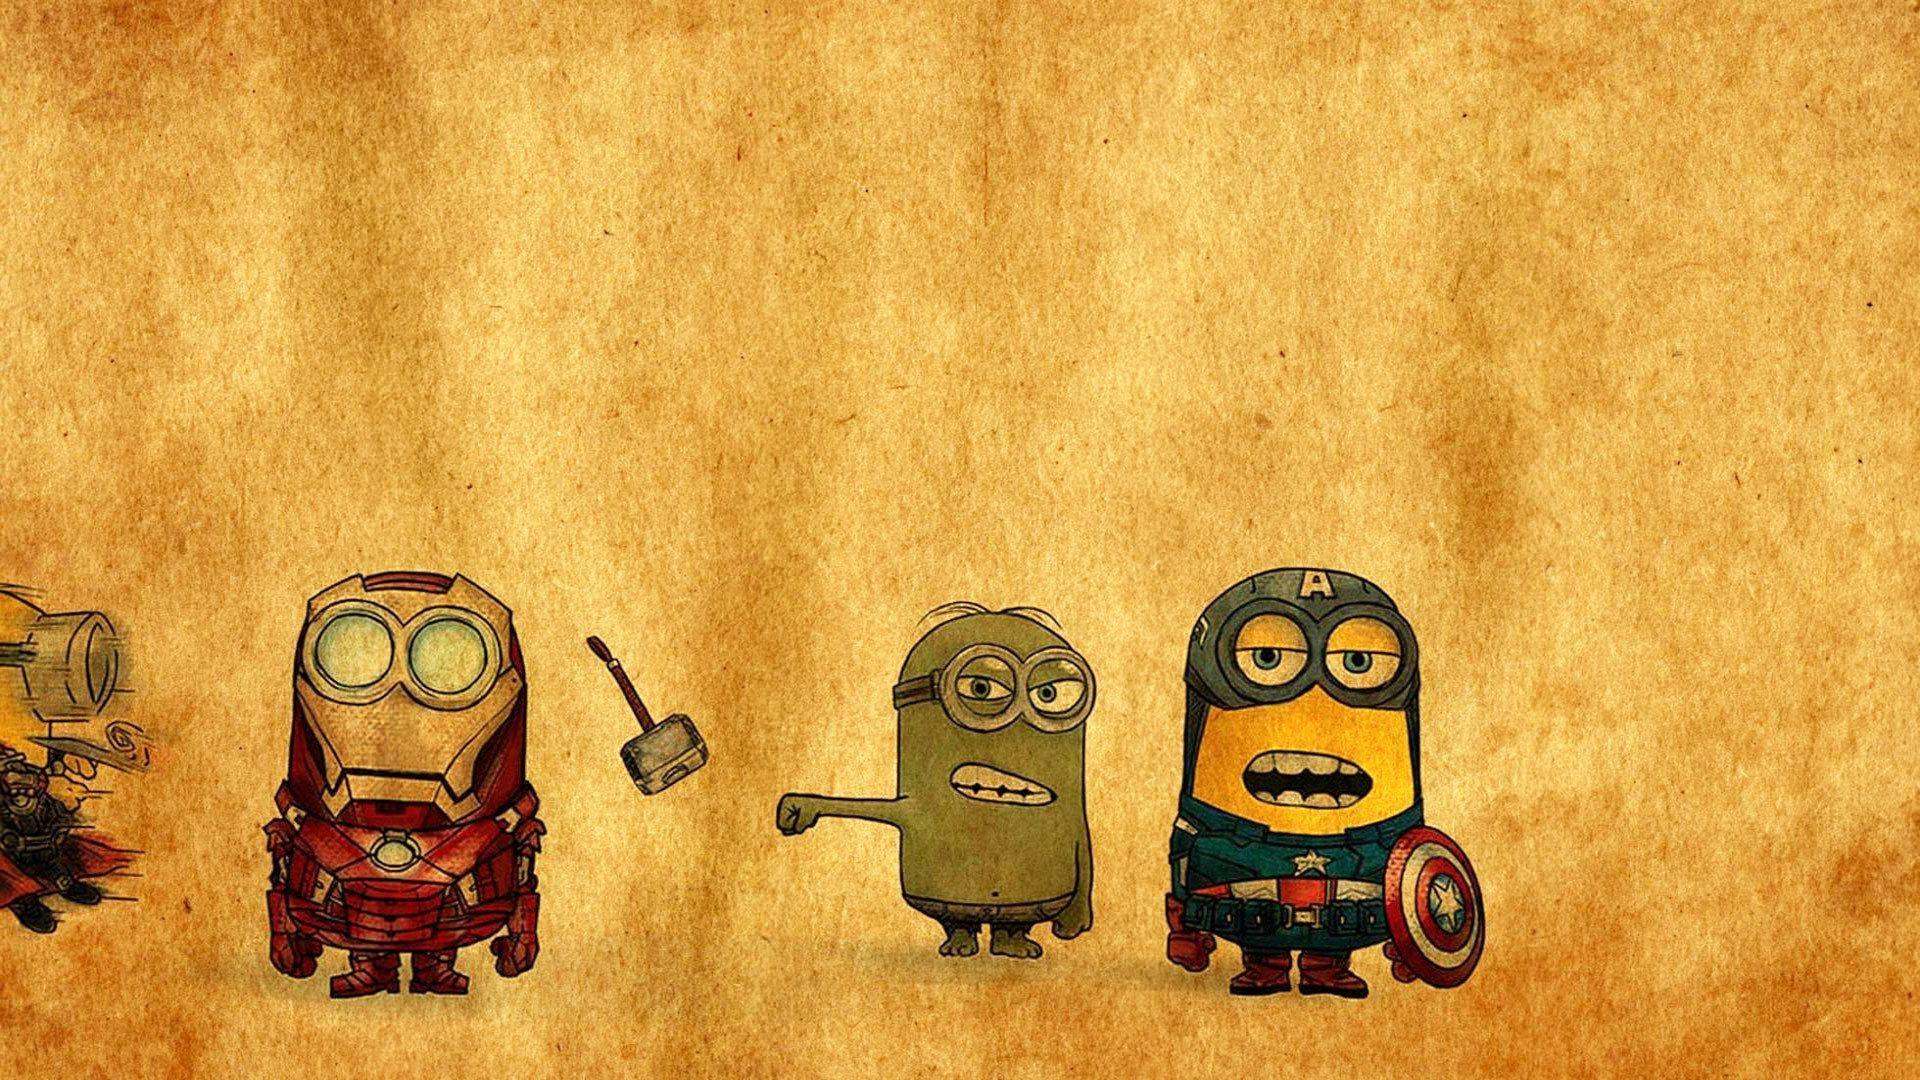 Minions superheroes wallpaper and image, picture, photo